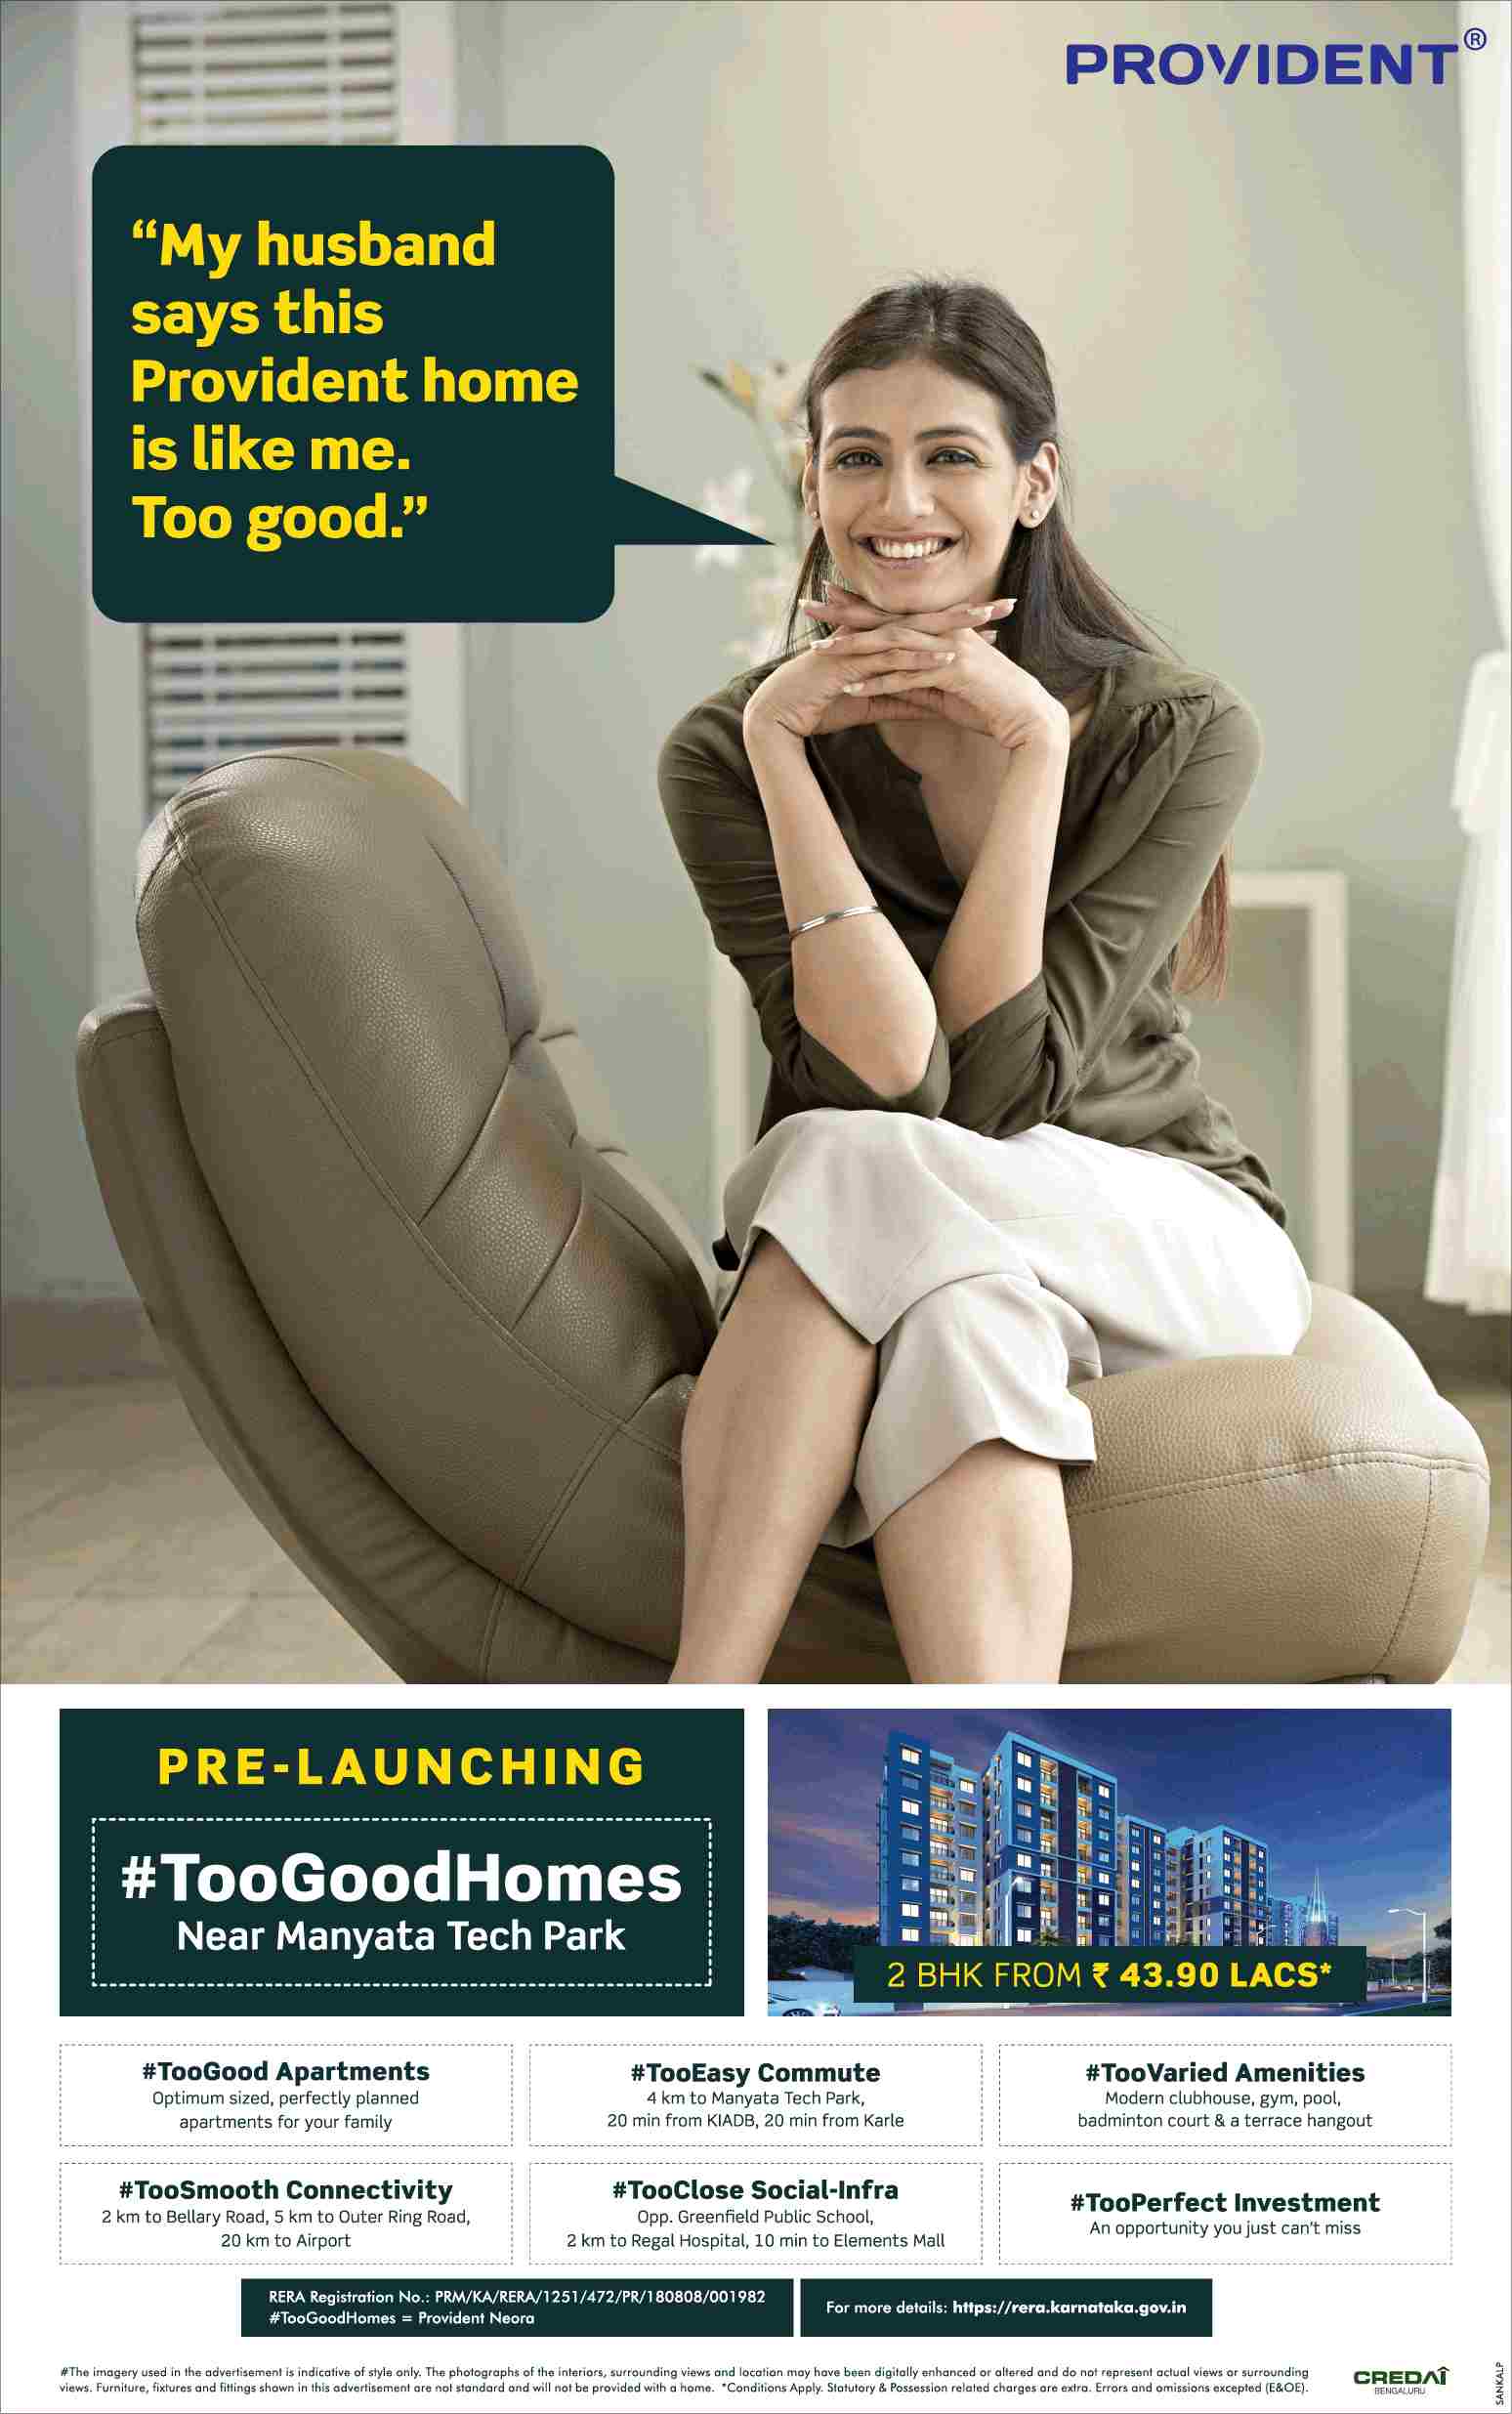 Book 2 BHK @ Rs 43.90 Lacs at Provident Too Good Homes in Bangalore